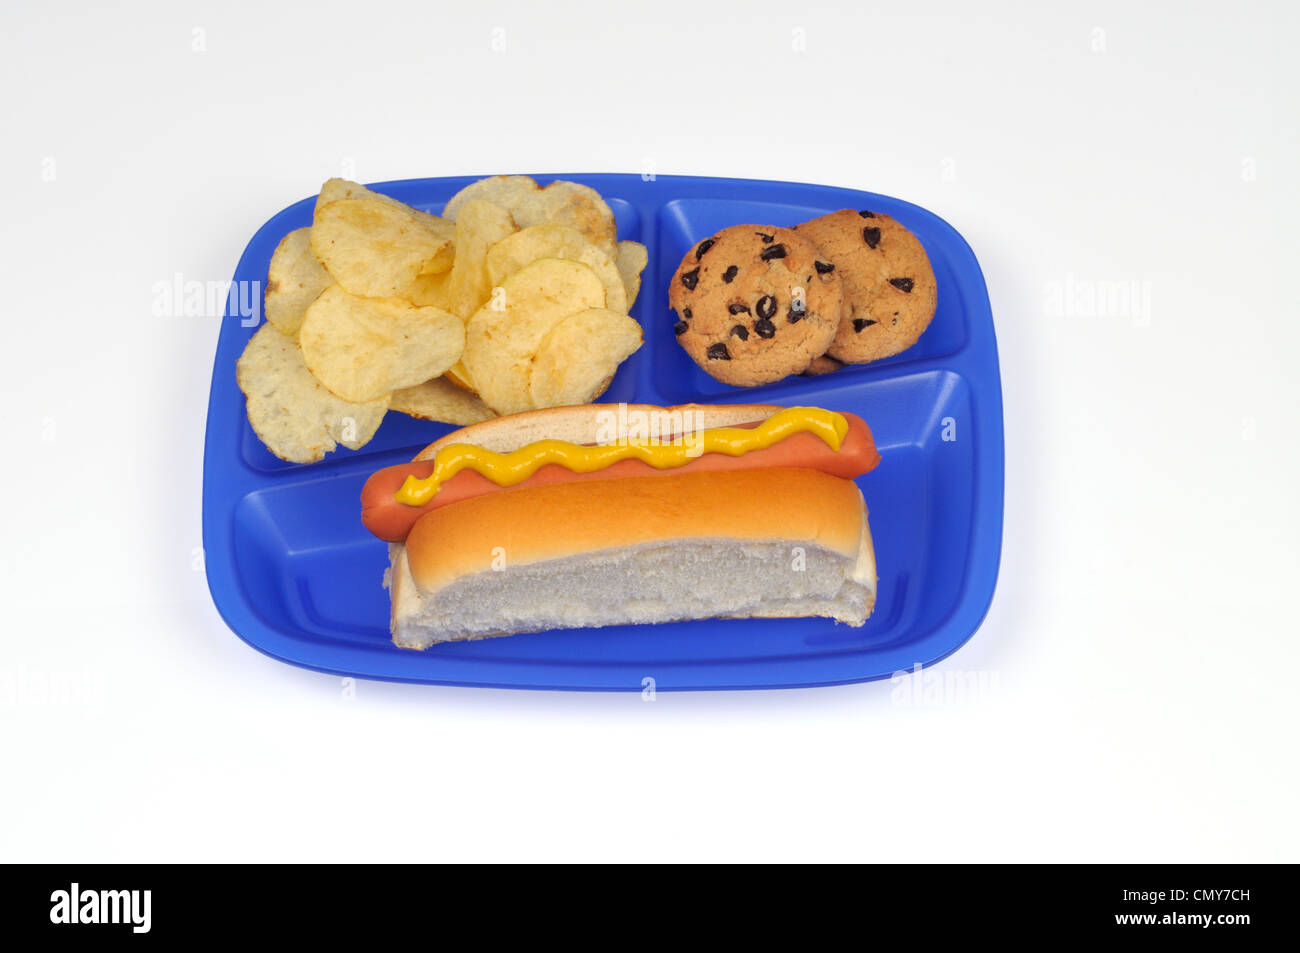 School lunch tray concept with hot dog, potato chips and chocolate chip cookies Stock Photo